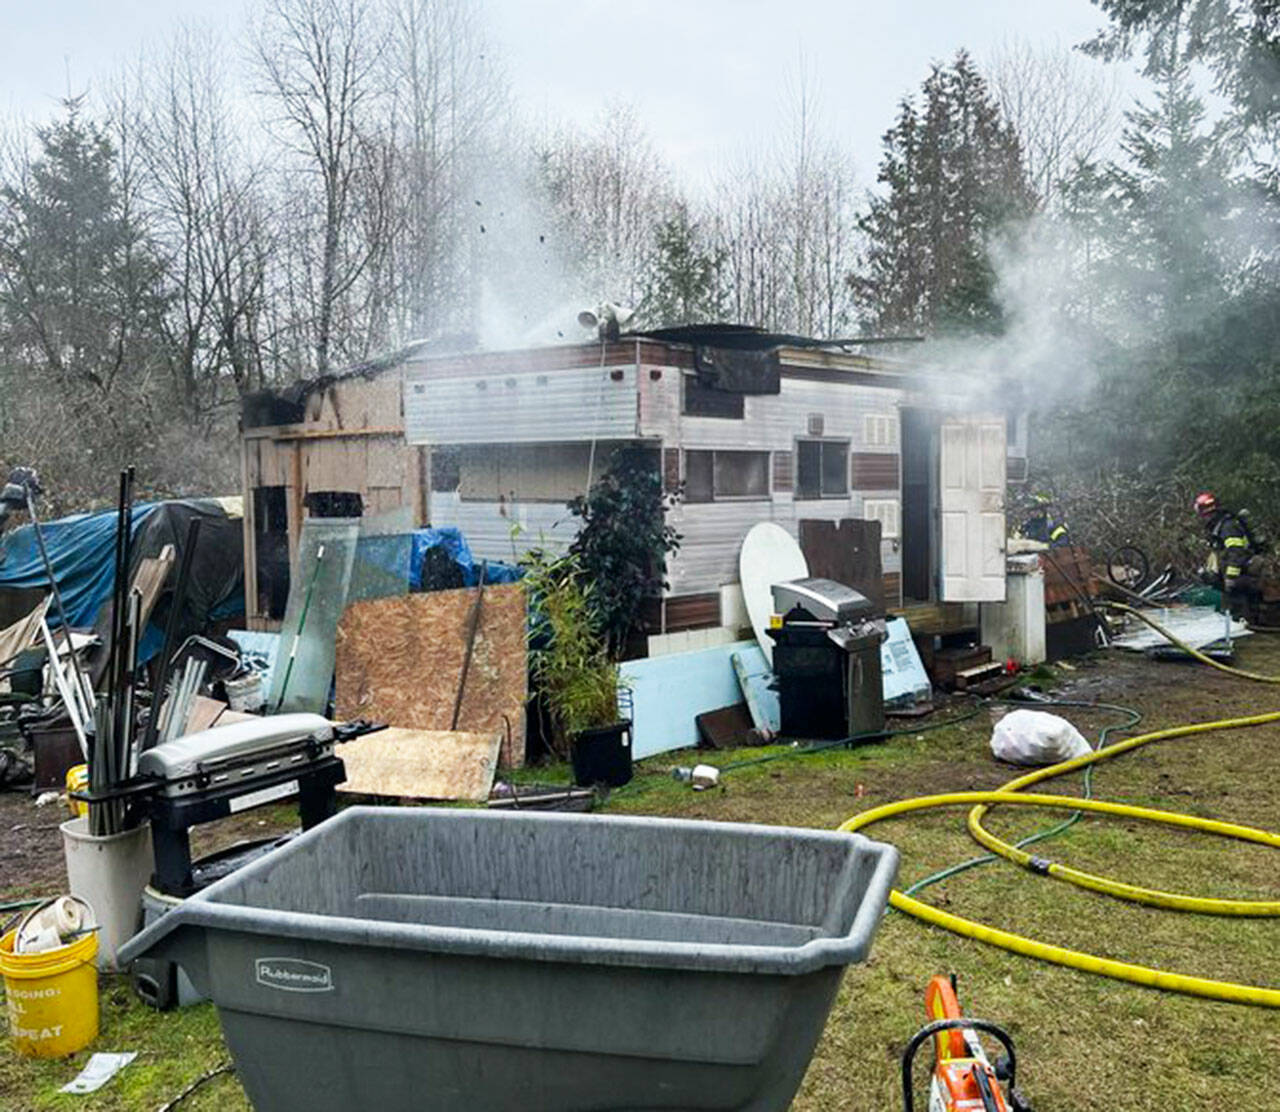 A fire at an RV Feb. 4 in Kent in the 13500 block of SE 208th Street injured a resident and a firefighter. COURTESY PHOTO, Puget Sound Fire